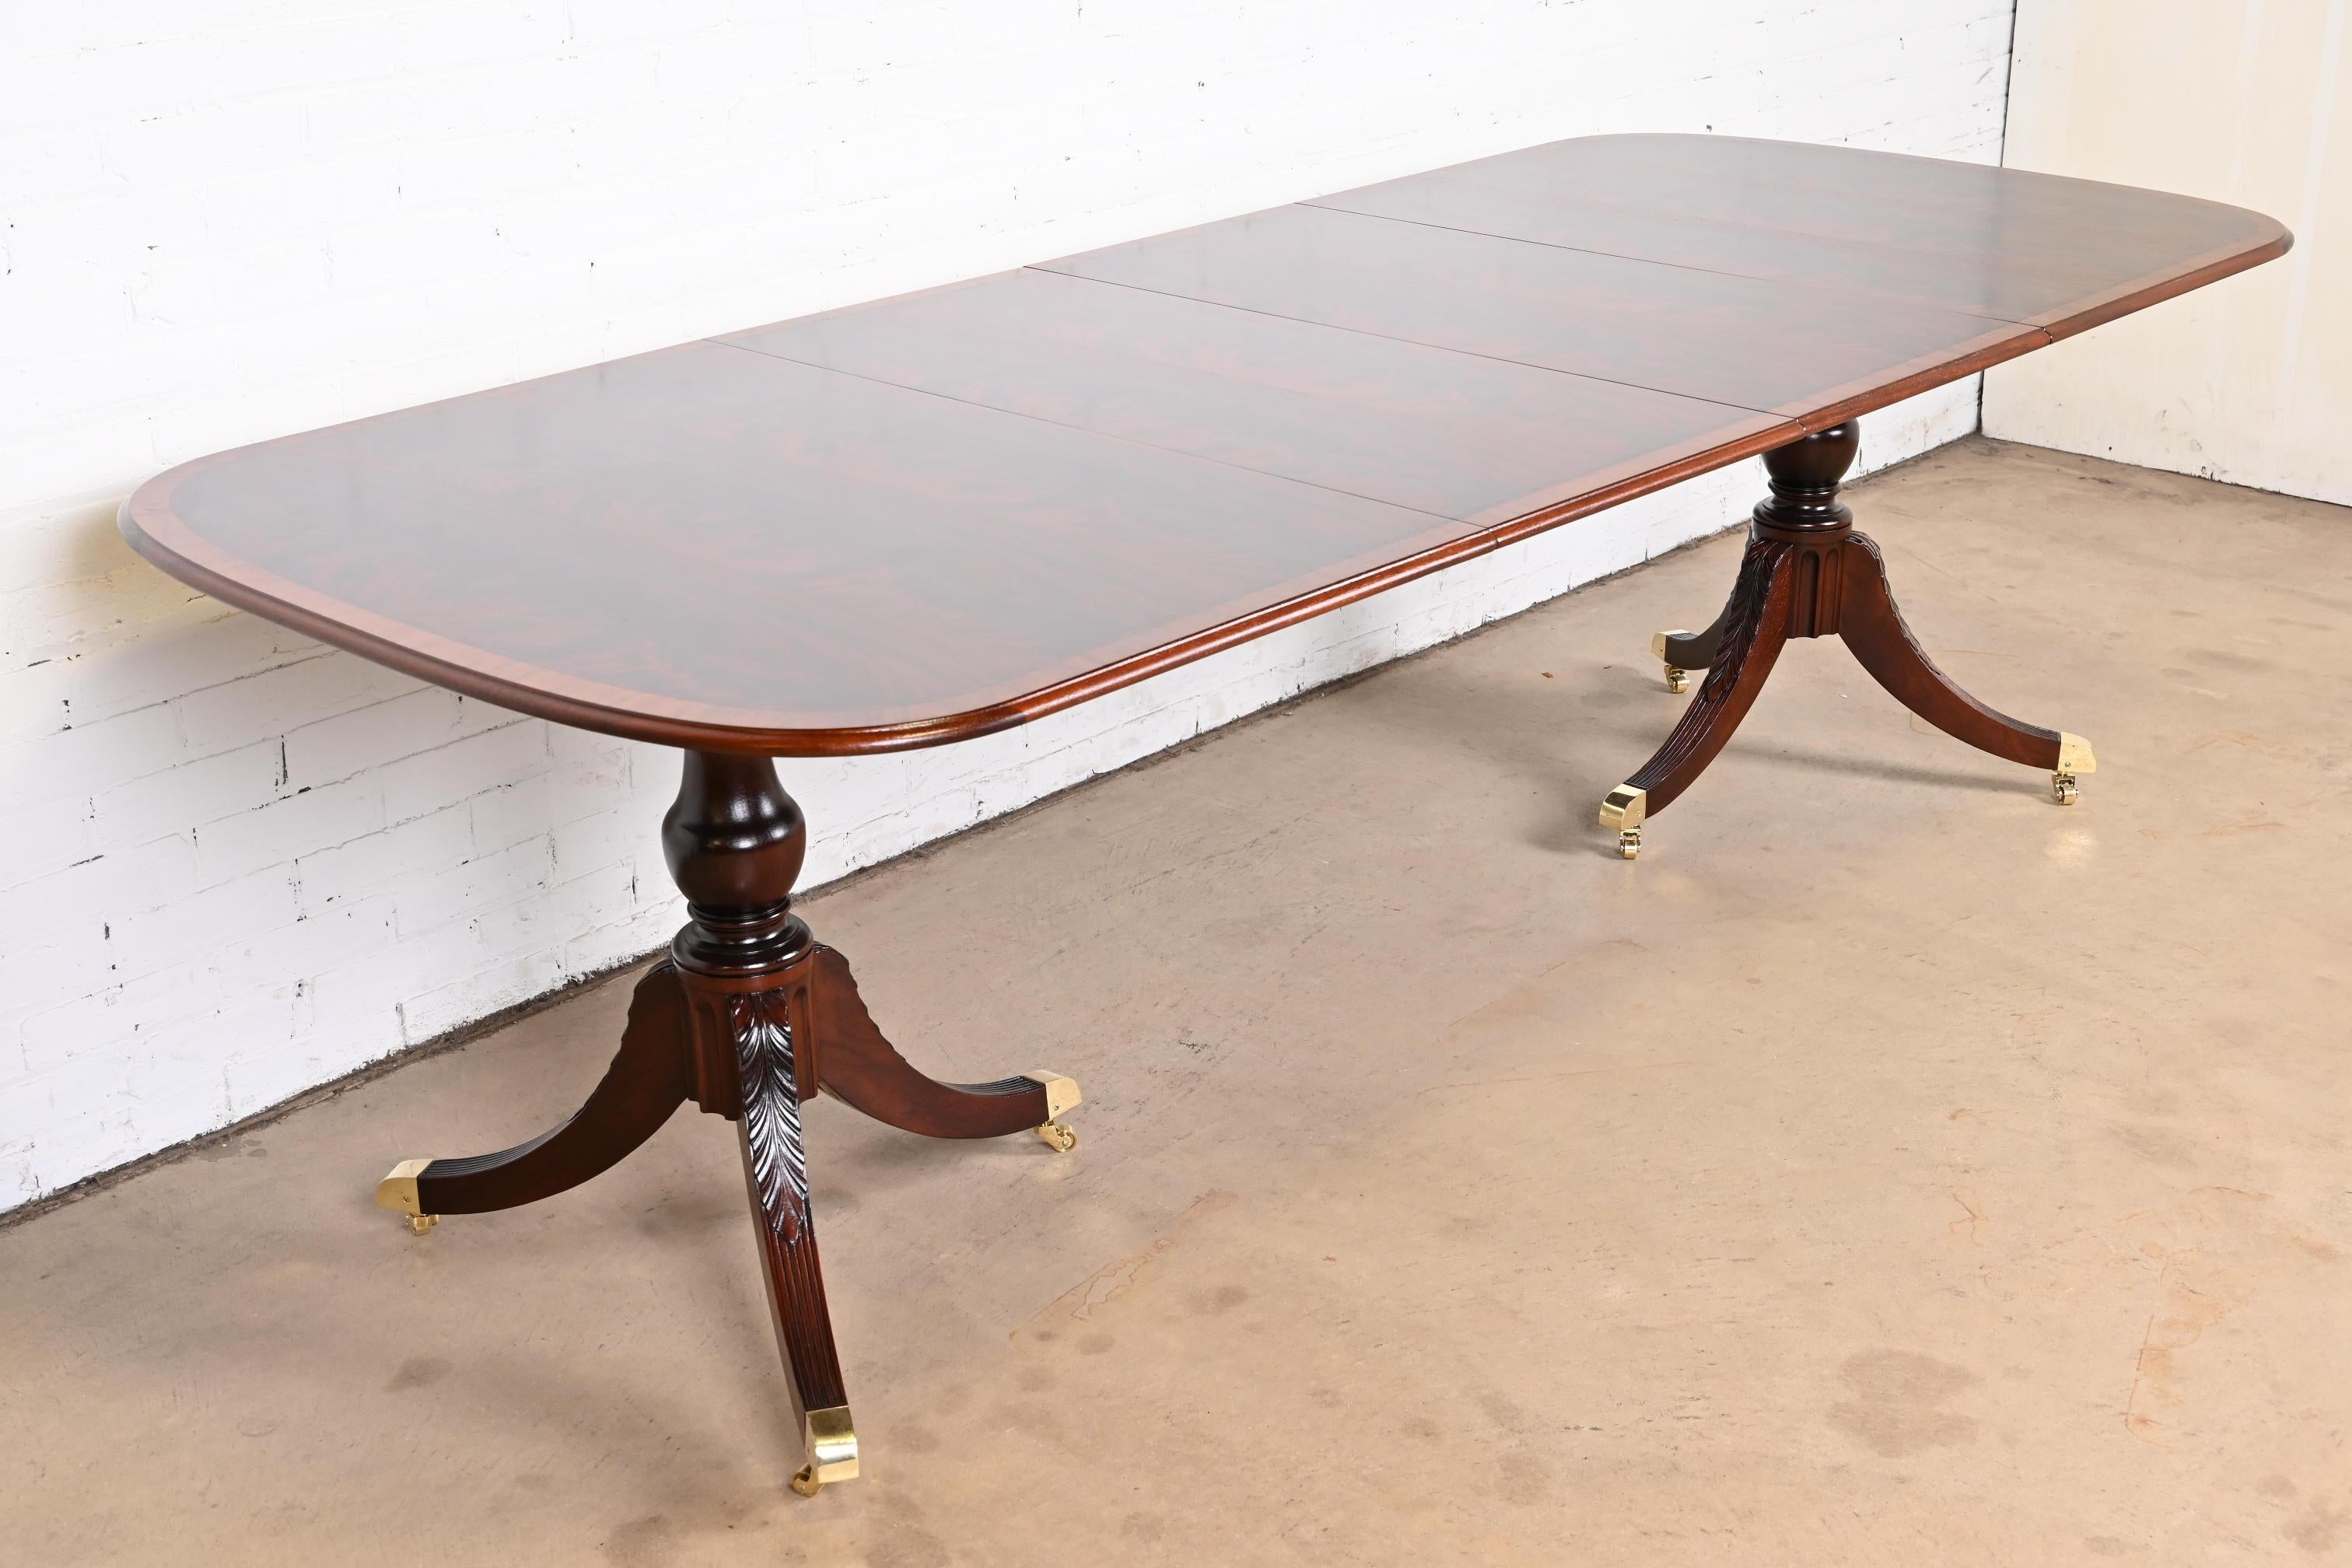 An exceptional Georgian or Regency style double pedestal extension dining table.

In the manner of Baker Furniture

USA, Mid-20th Century

Gorgeous book-matched flame mahogany, with satinwood banding, carved solid mahogany pedestals, and